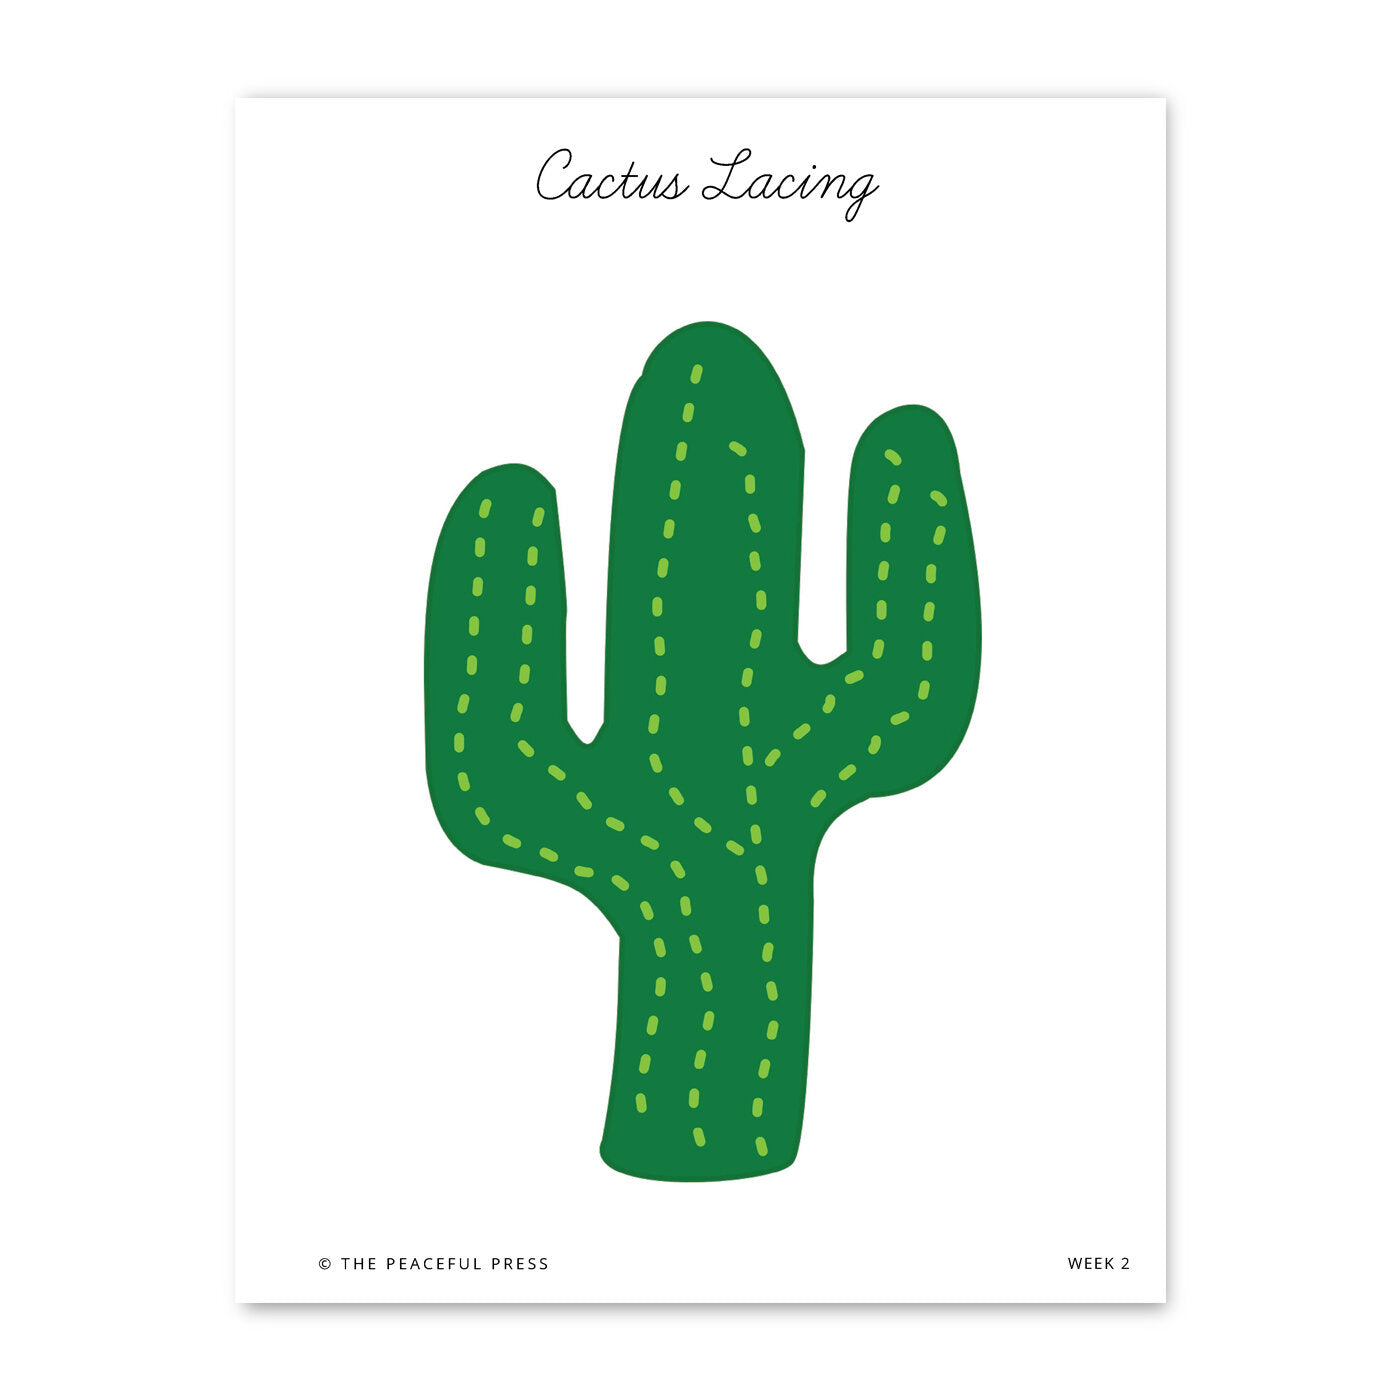 Homeschool Sample project, for the "Desert Guide", a cactus lacing project.